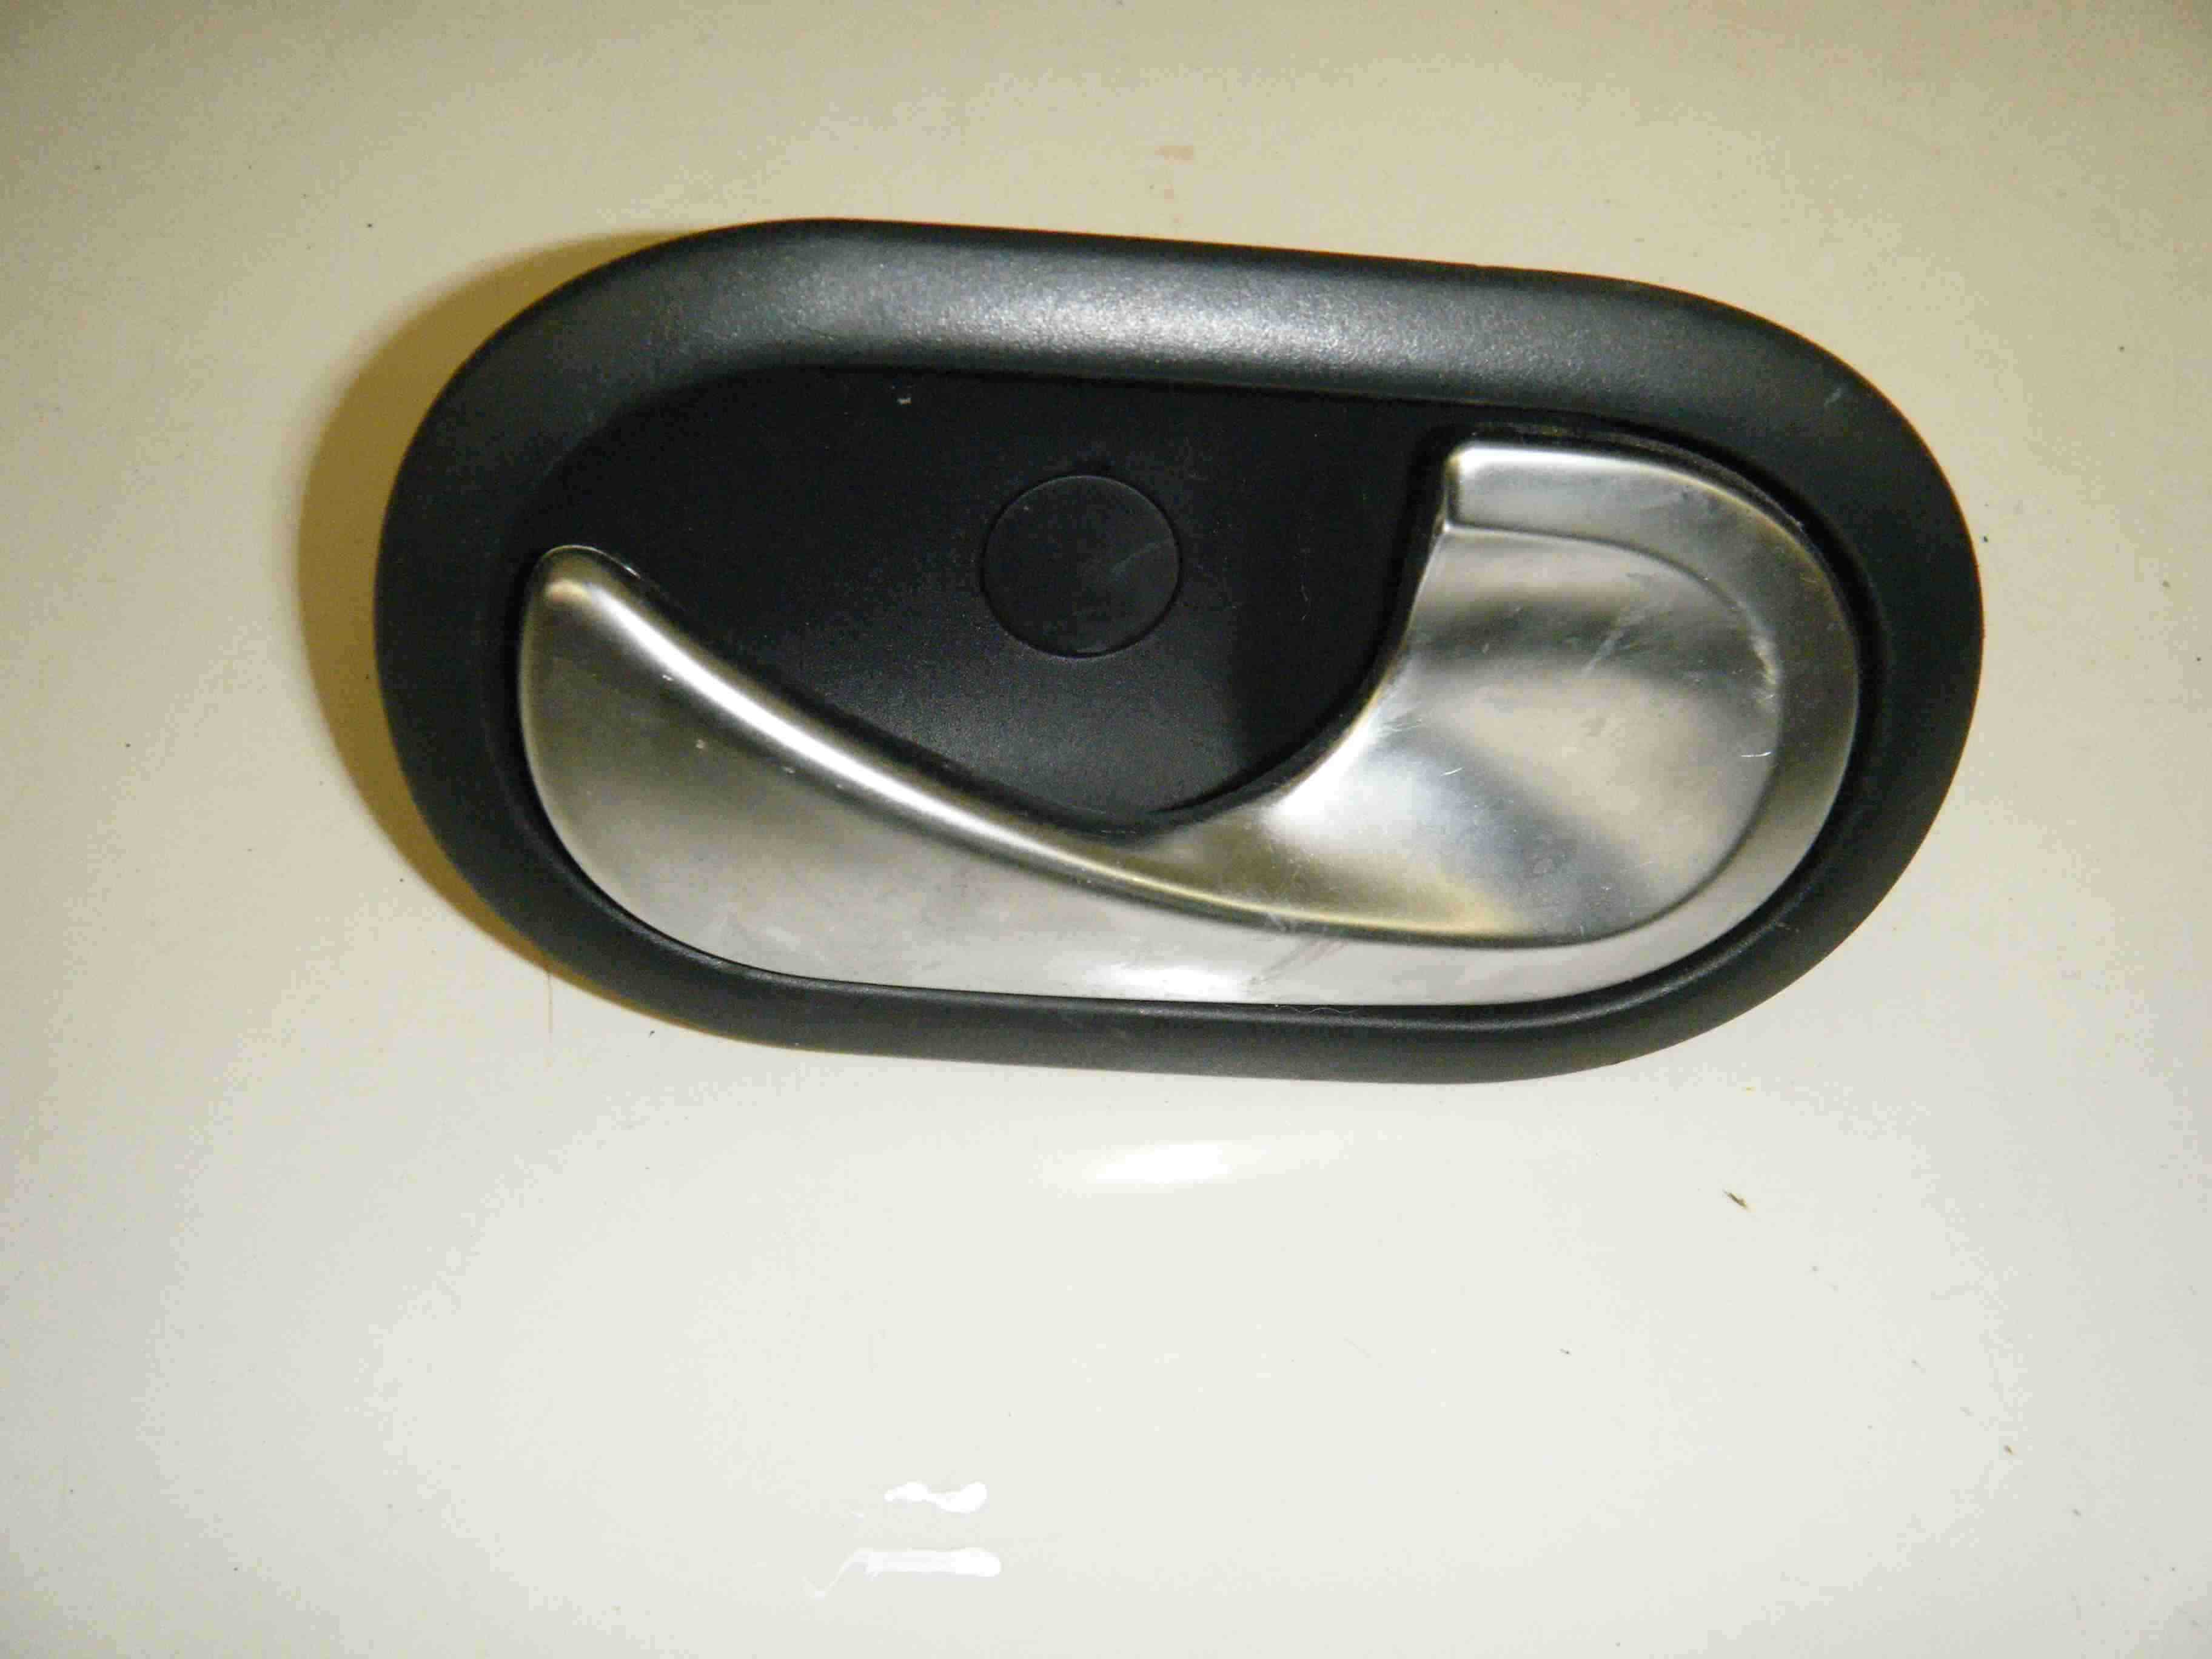 Renault Clio MK3 2005-2012 Drivers OSF Front Door Handle Interior Silver Chrome